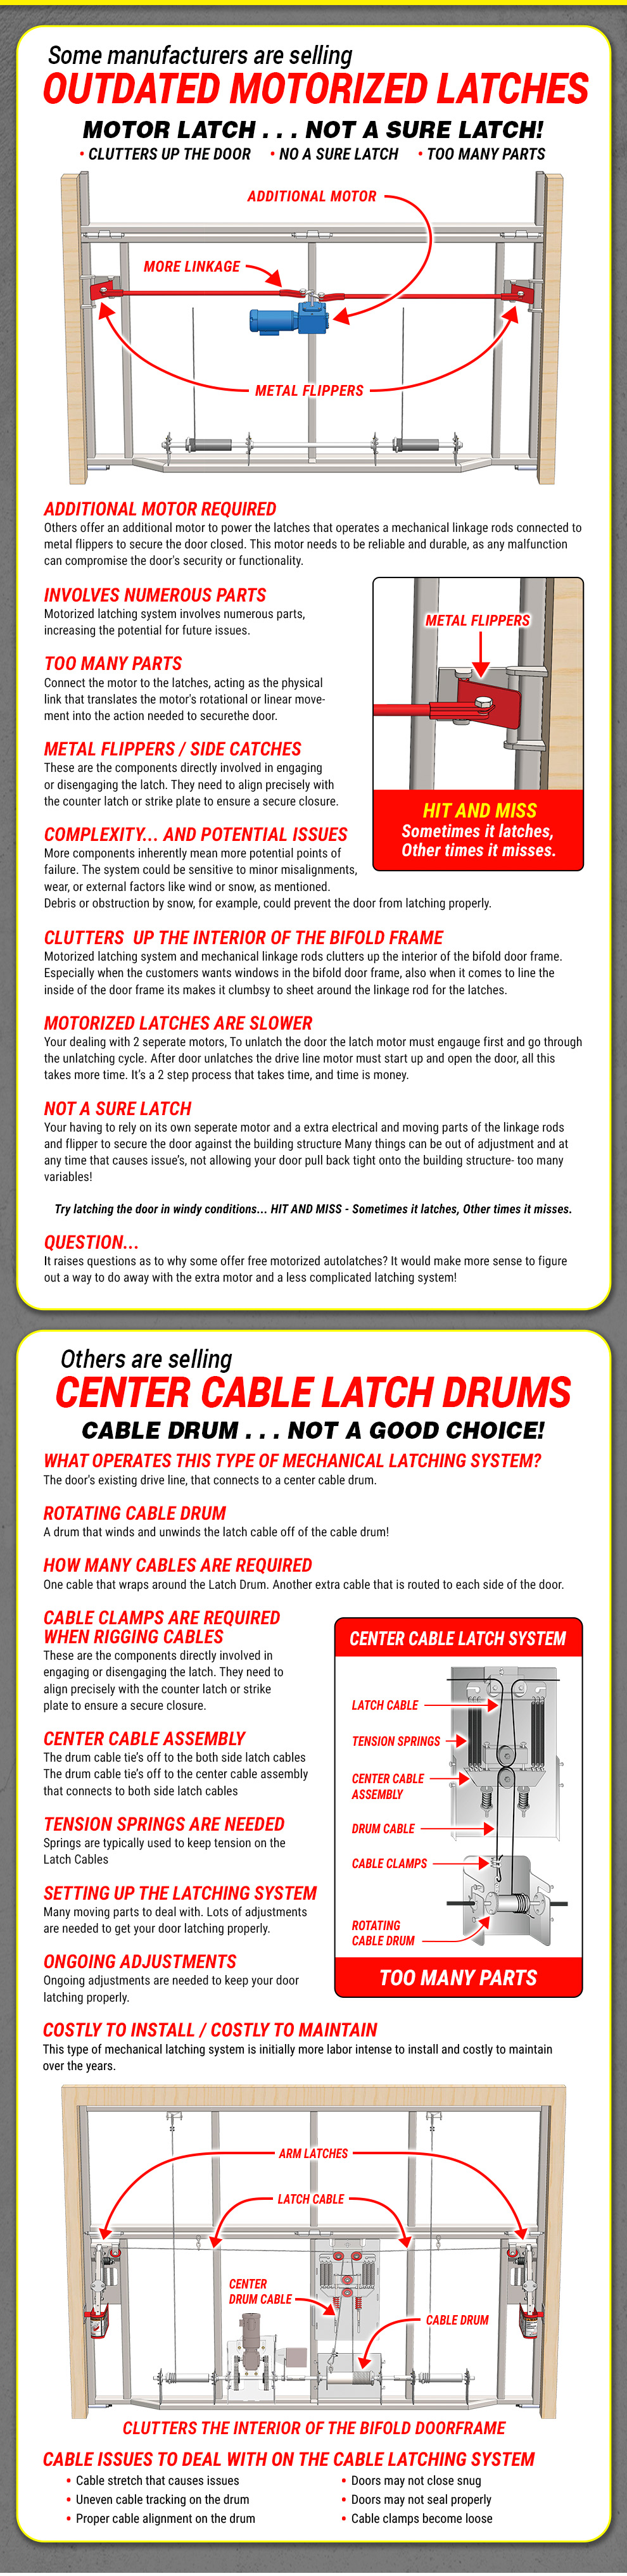 Straps Vs Cables - Other Manufacturers Are Selling Outdated Latching Systems